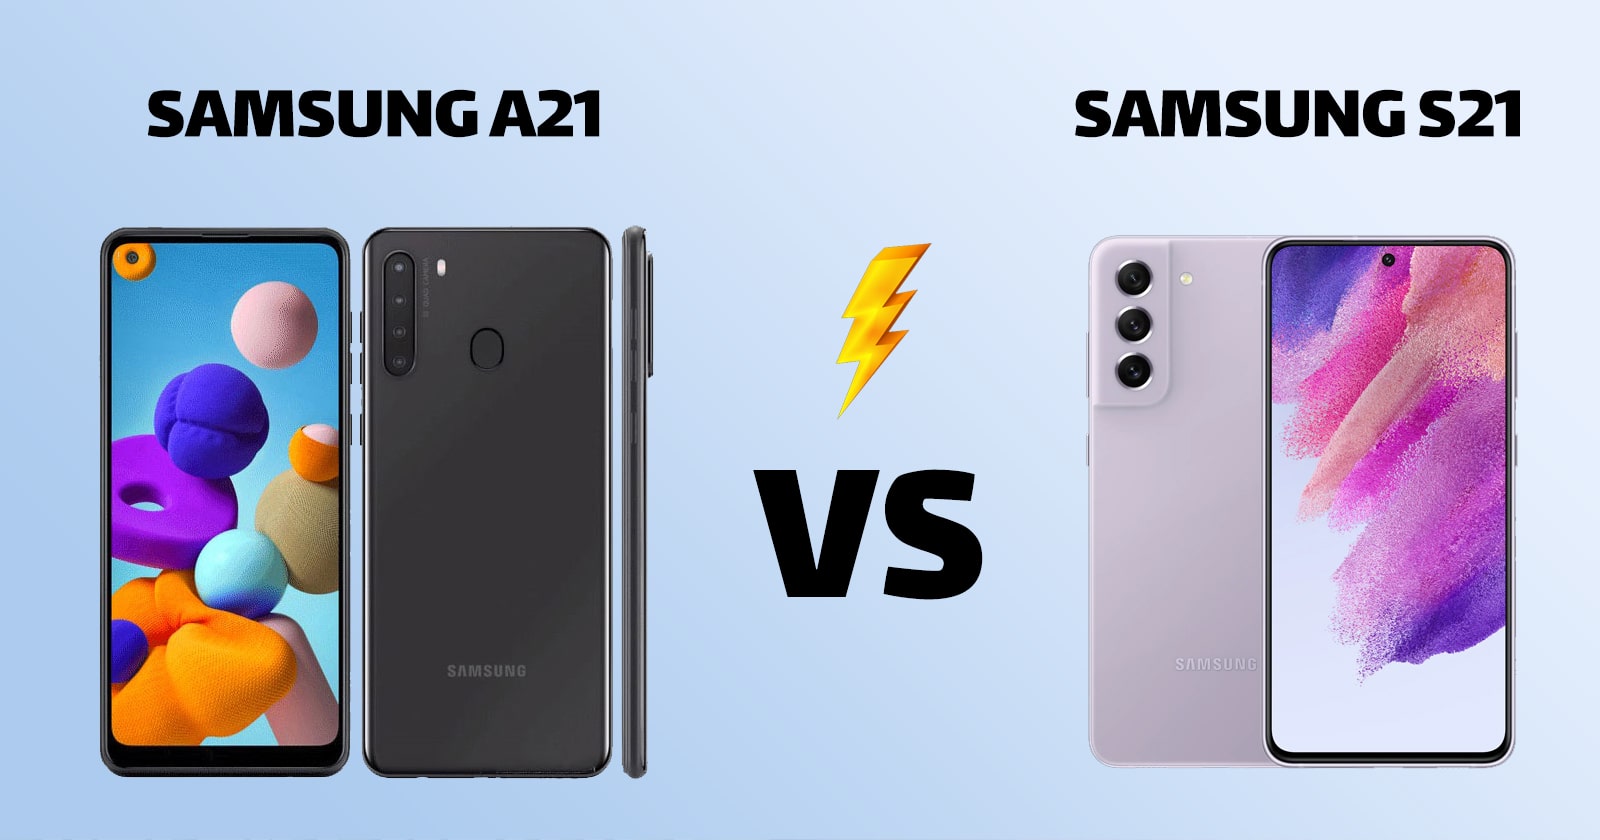 What Is the Difference Between Samsung A21 and S21